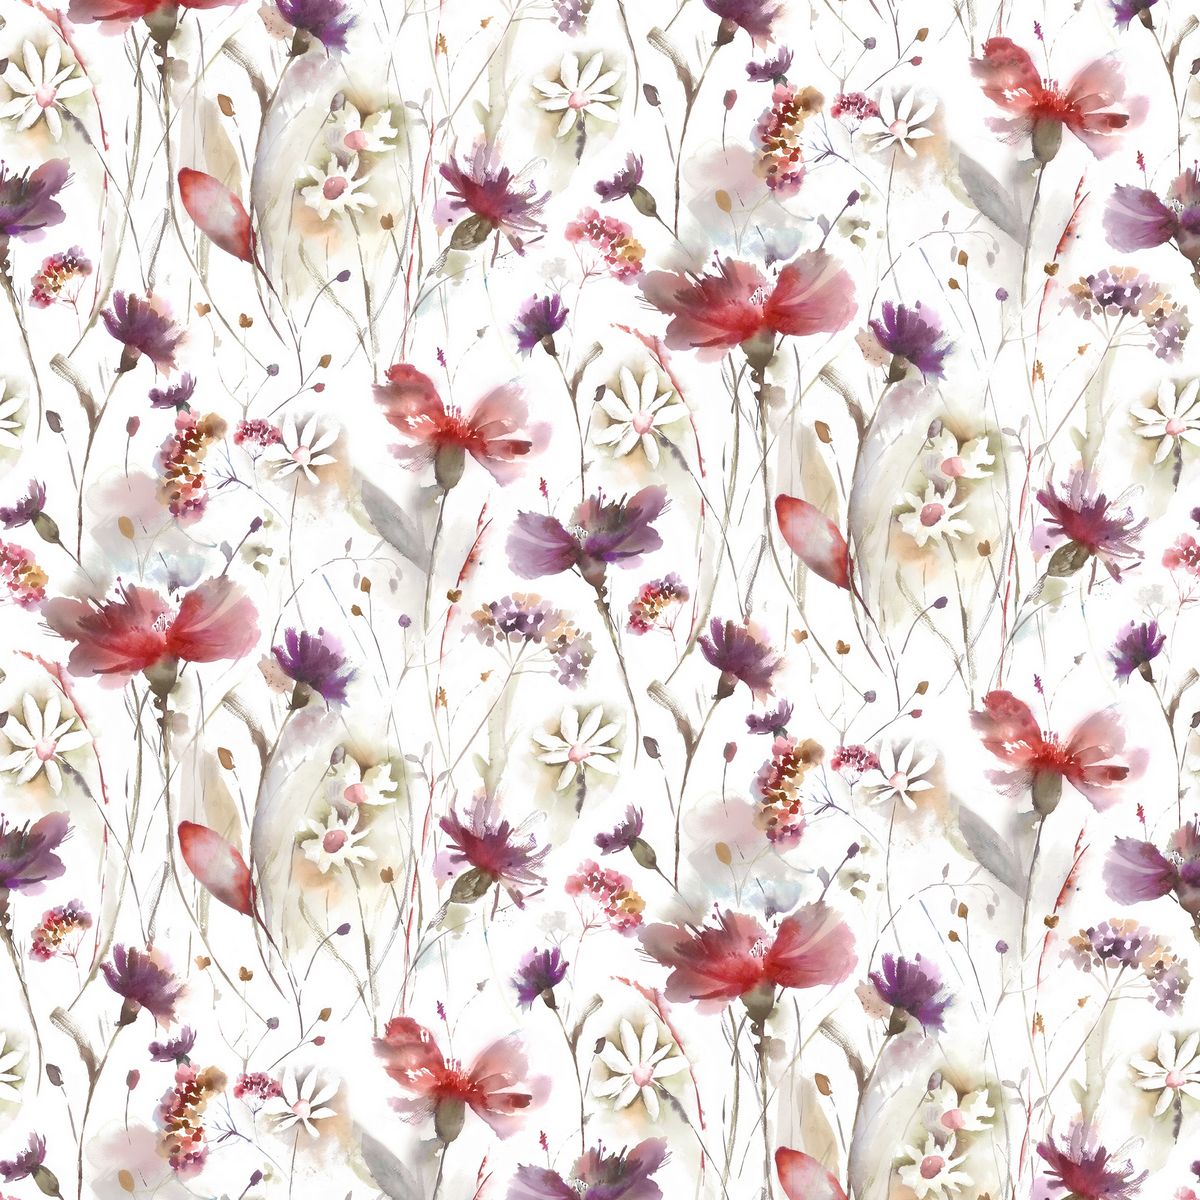 Olearia Cream Boysenberry Fabric by Voyage Maison